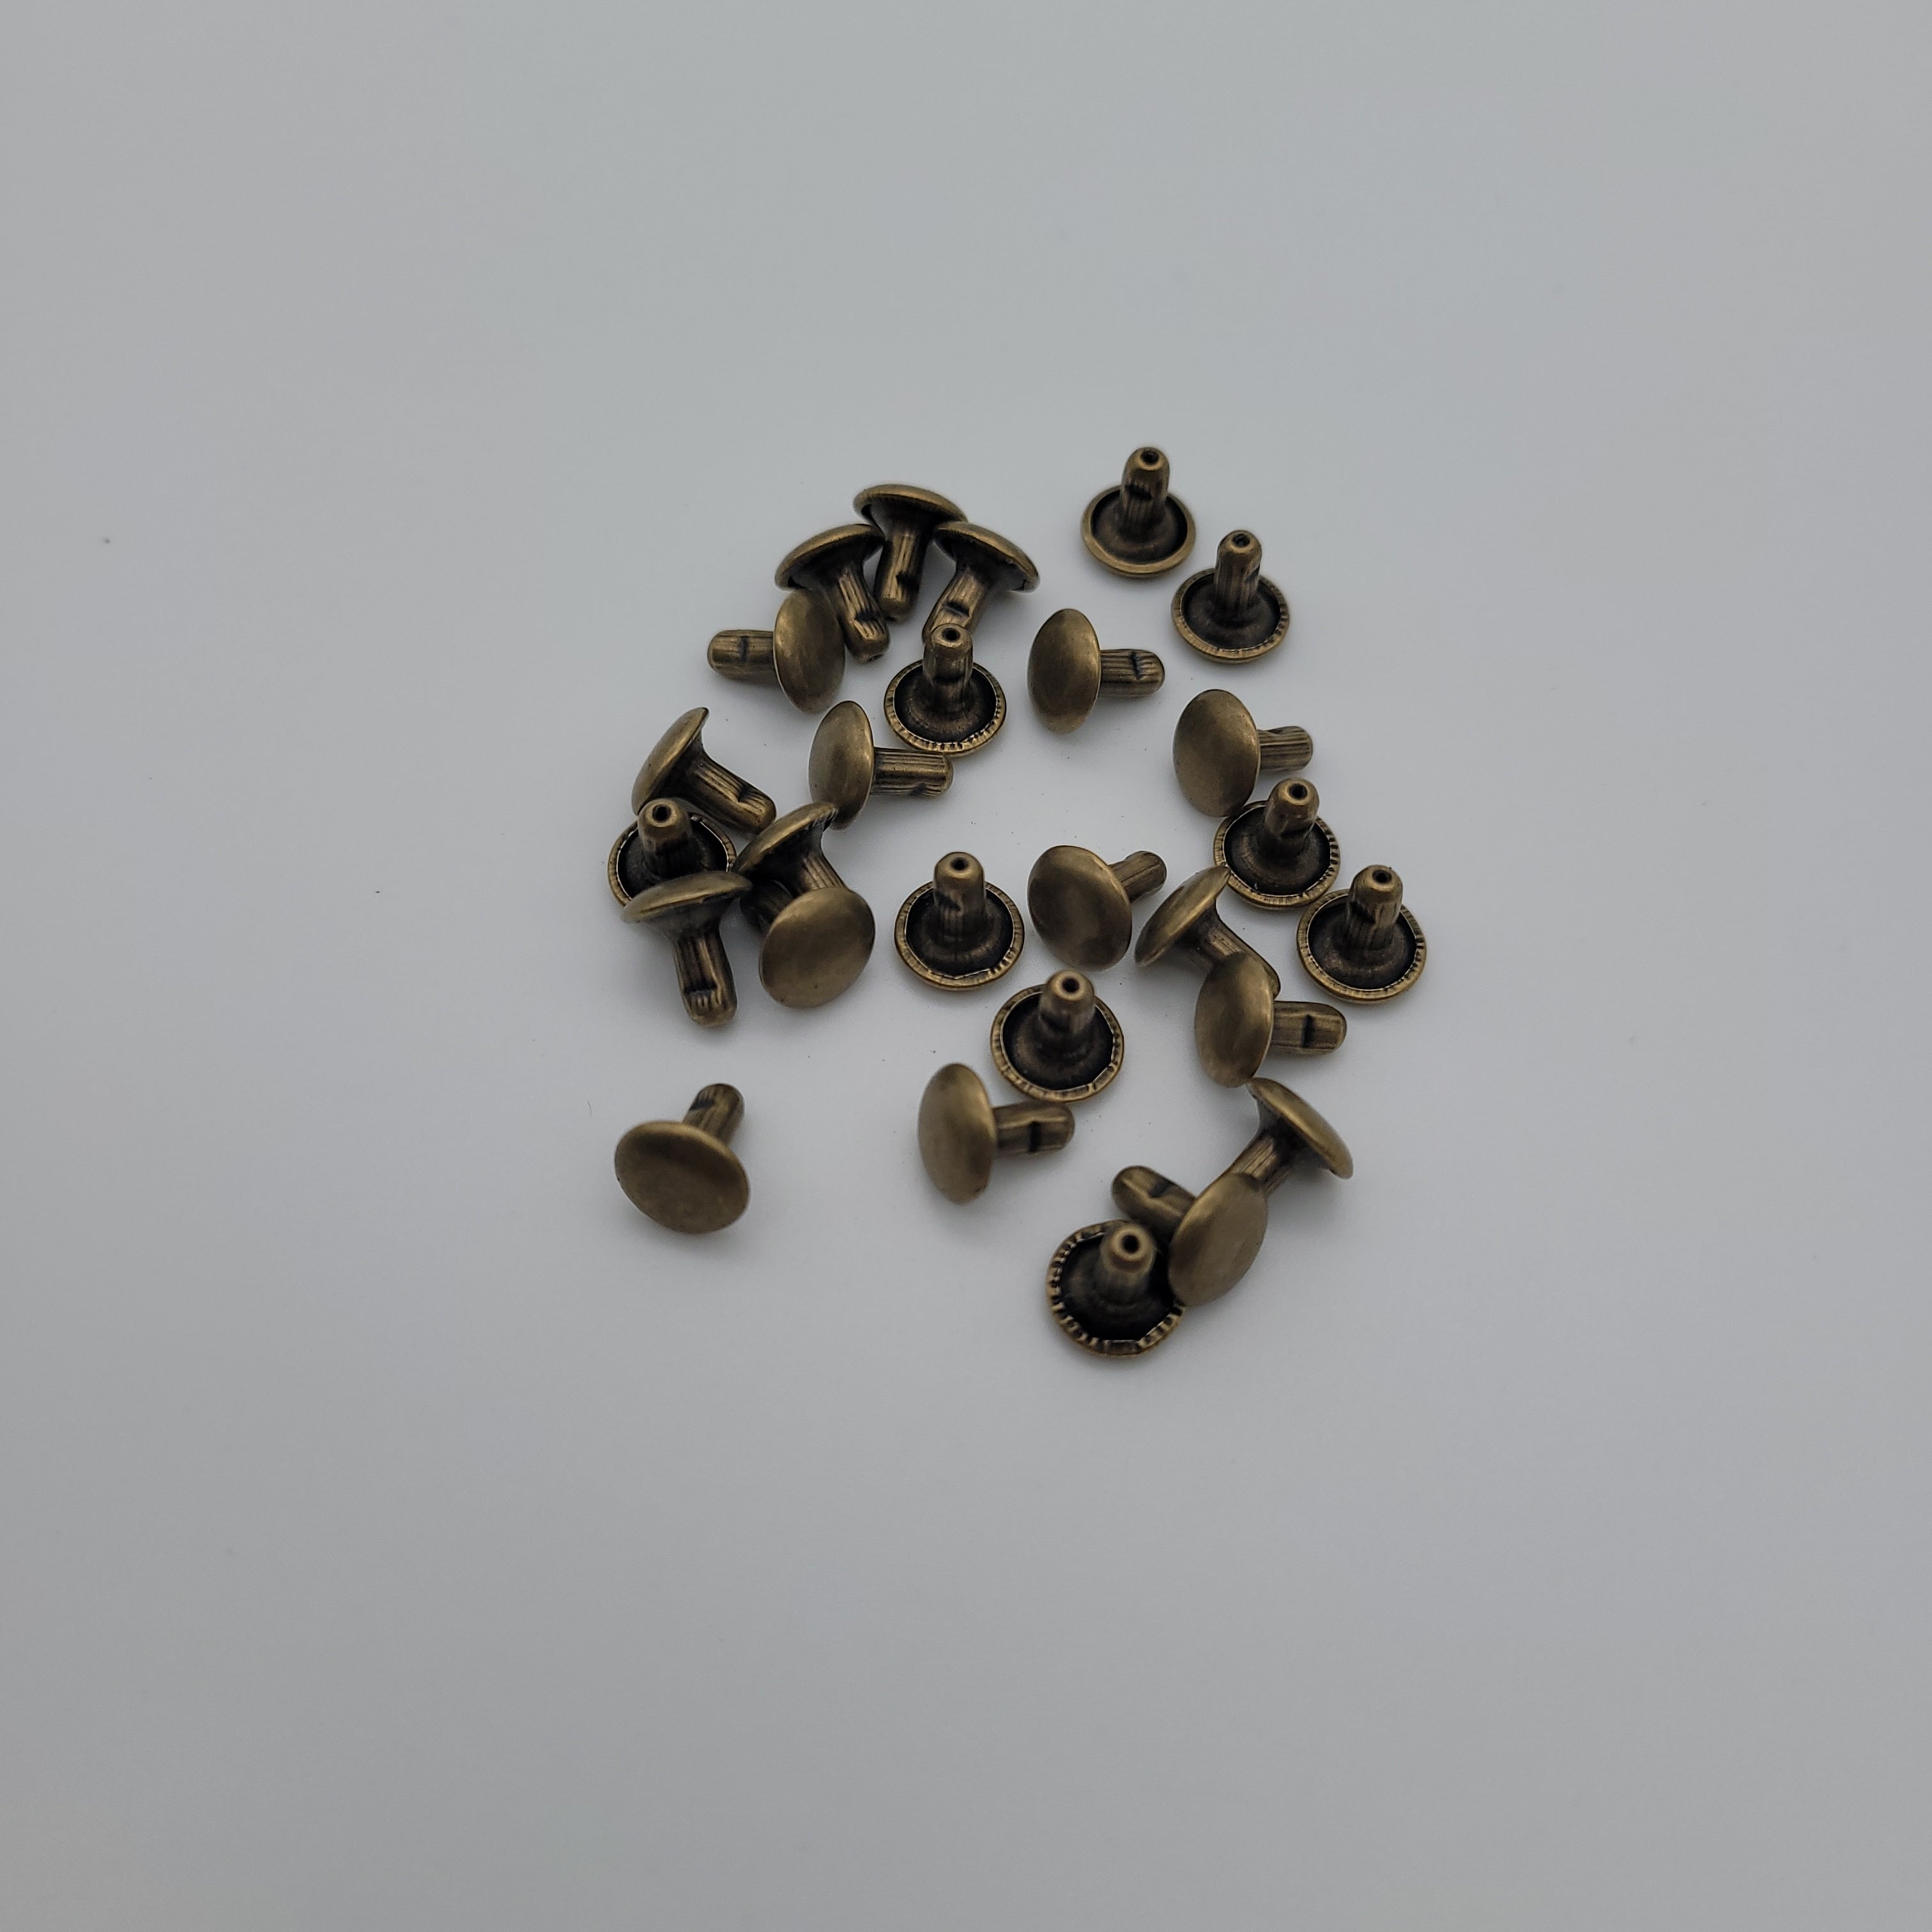 60 sets of High Quality Pure Brass Rivets, 6mm, 8mm Rivets, Brass Surf